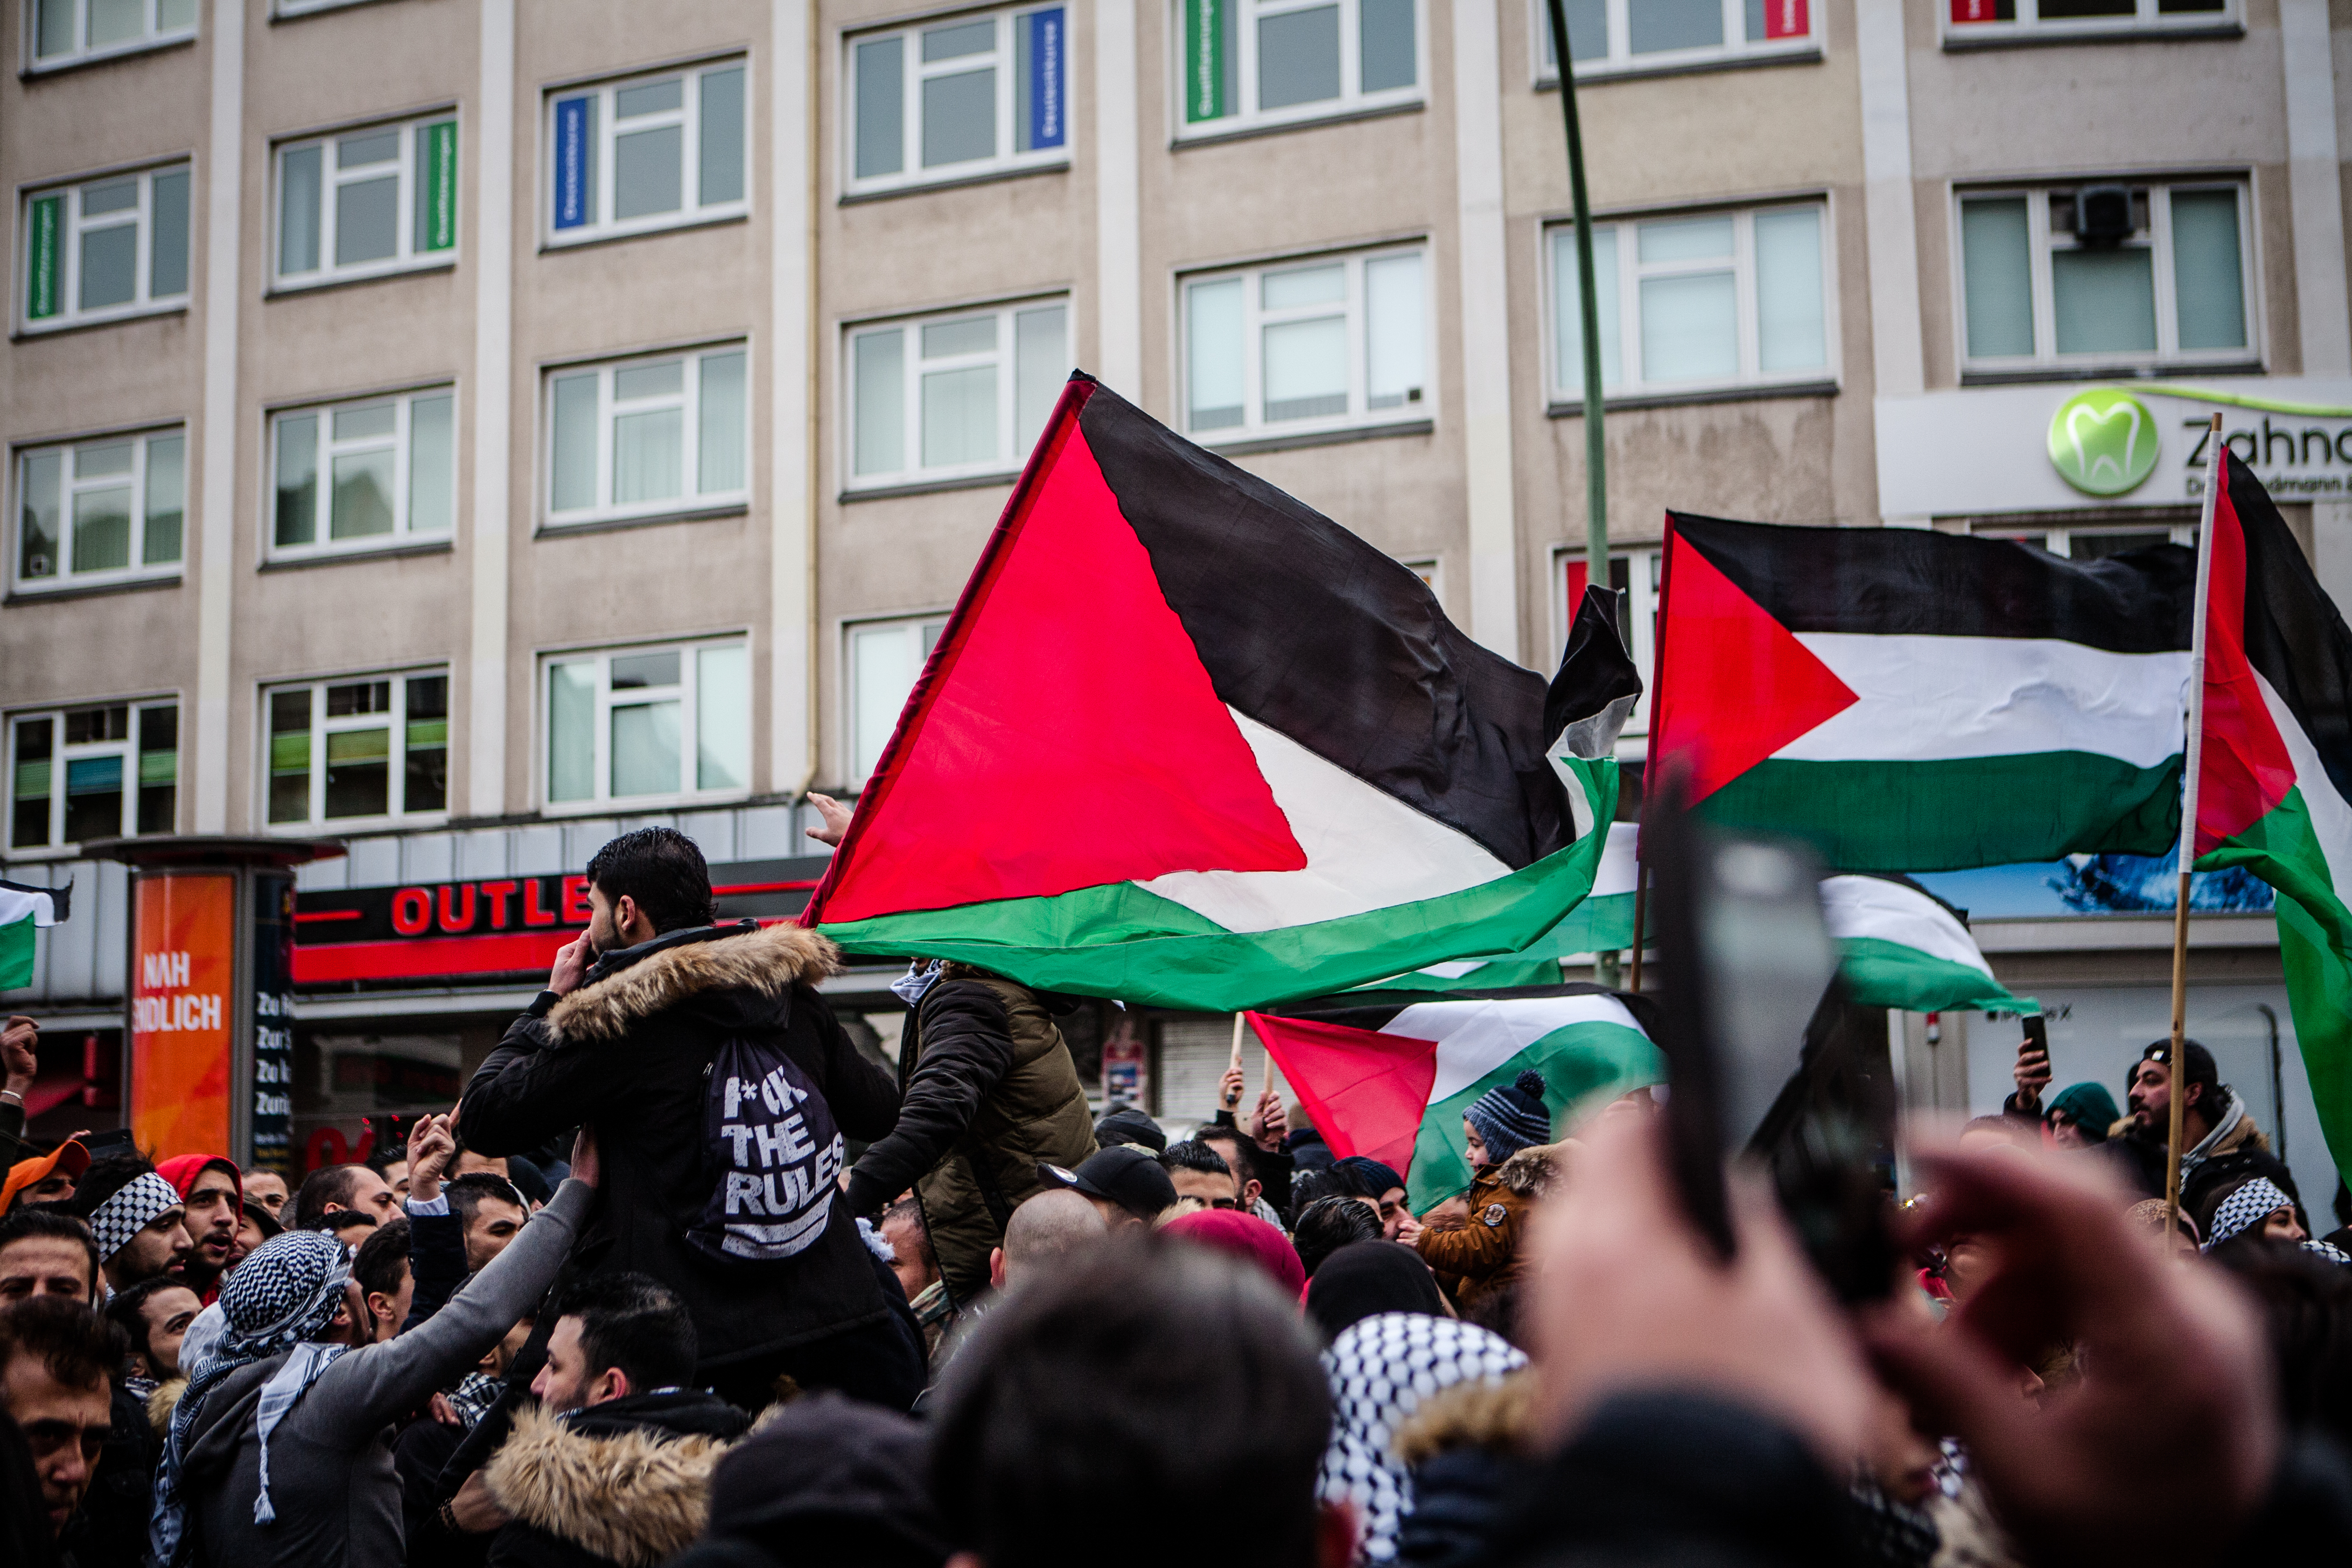 File:Palestine solidarity protest (38272721154).jpg - Wikimedia Commons